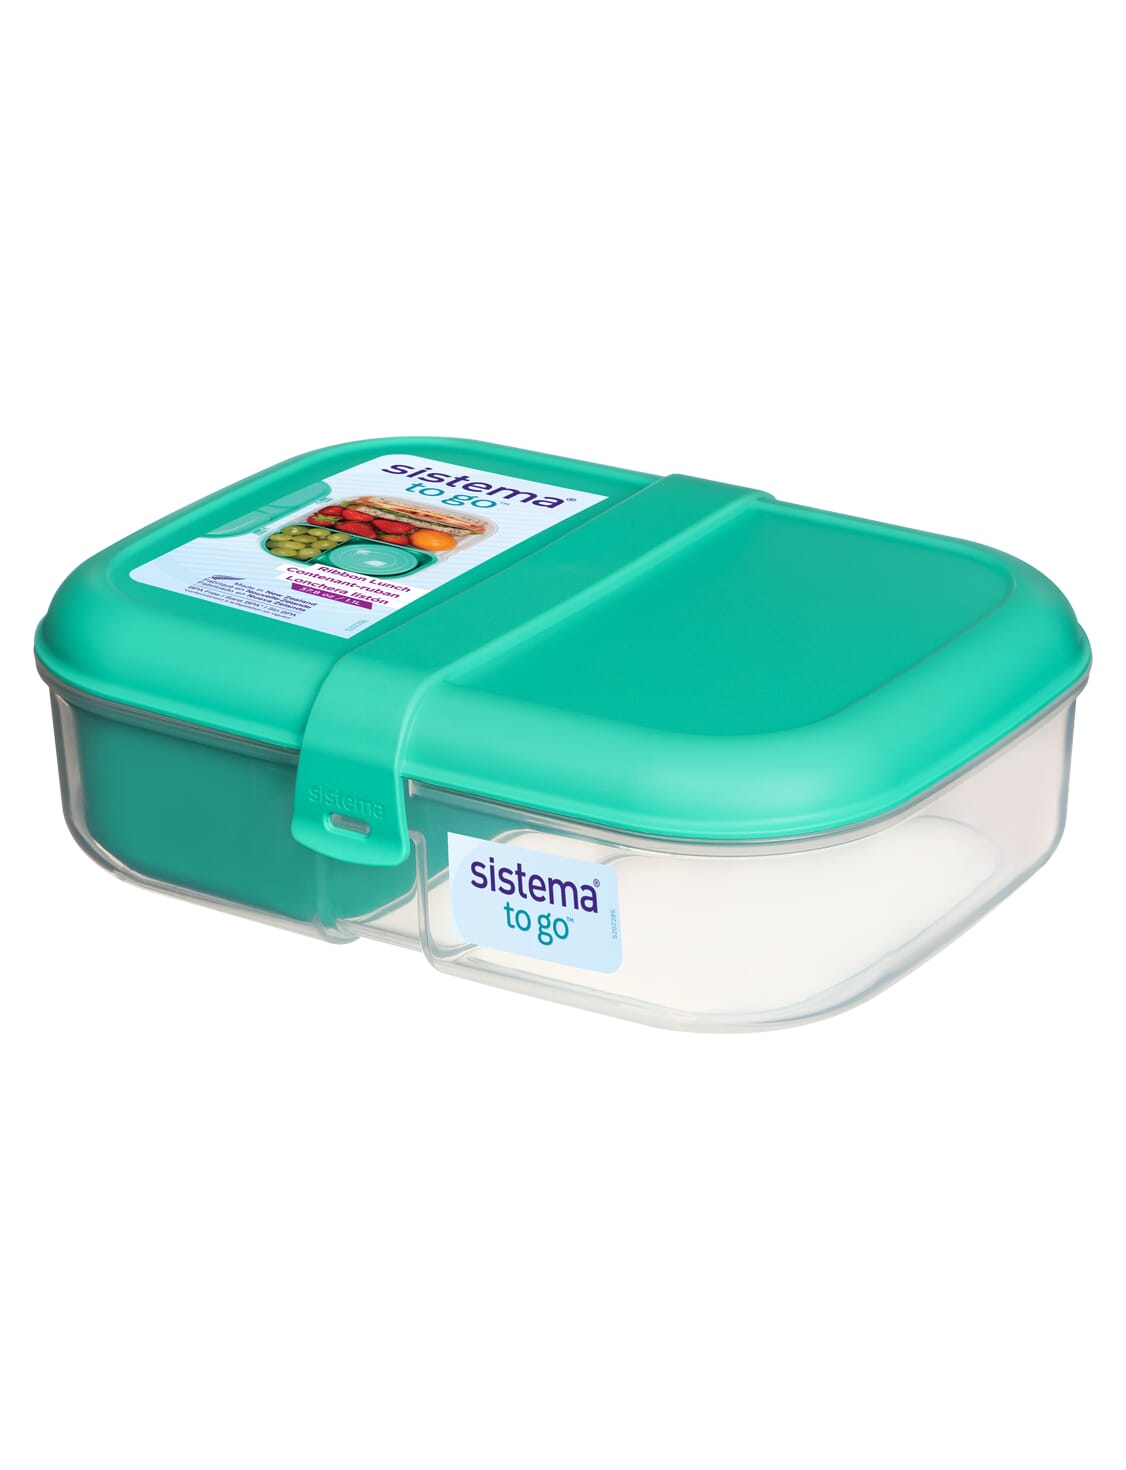 Lunchbox with Handle Lunch Box Cling Pot sandwichbox Bread Tin 1,6 Litre 